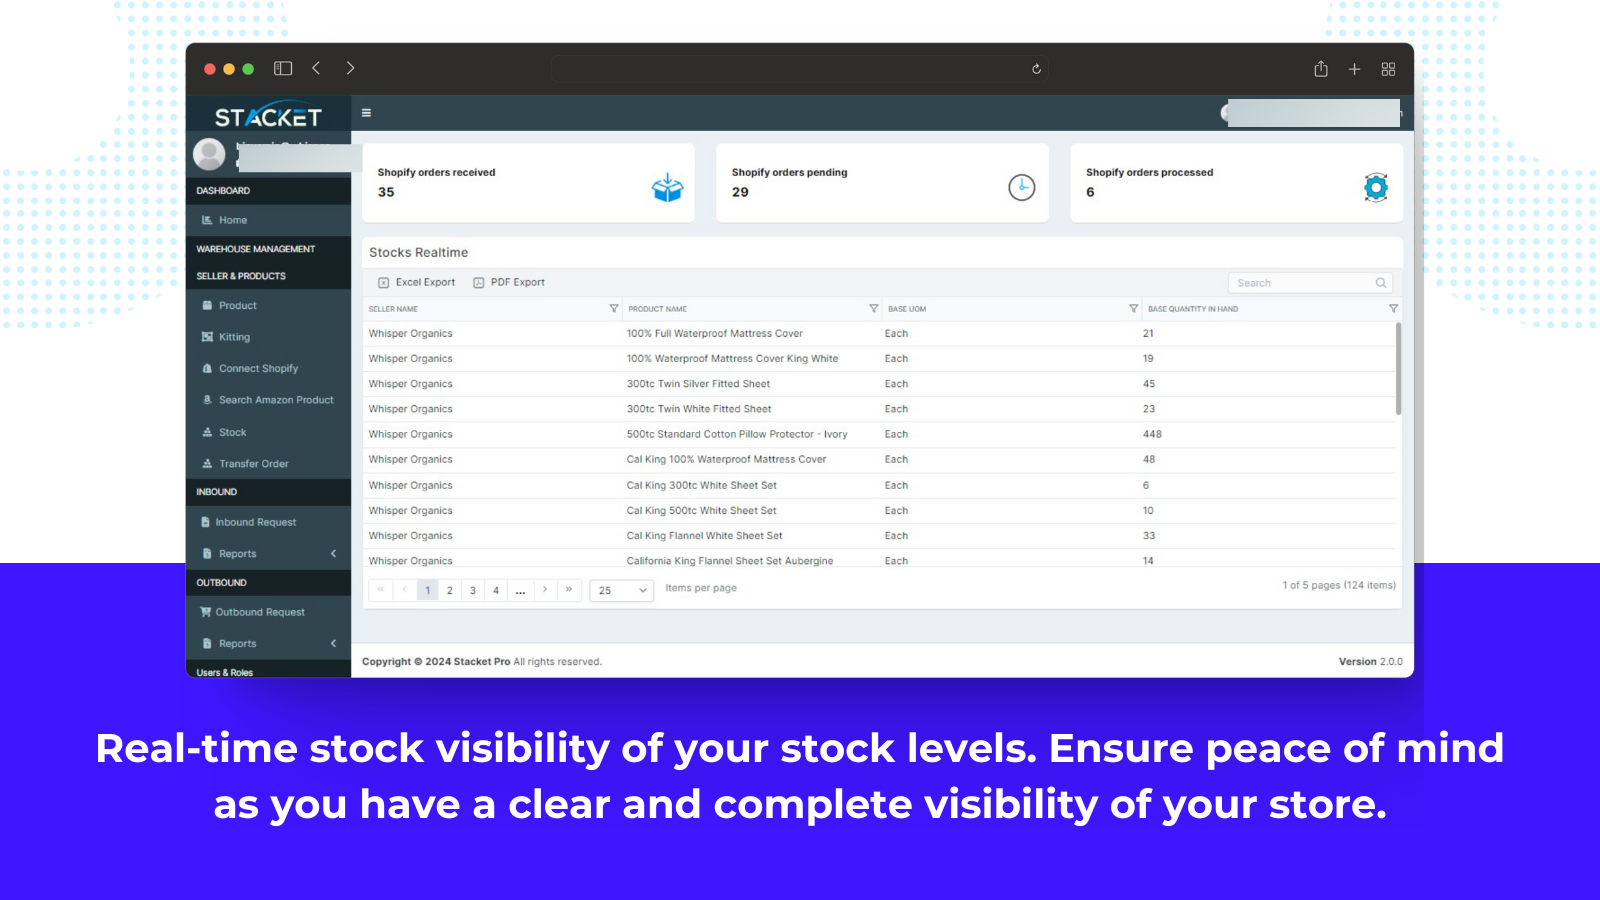 Real-time stock visibility of your stock ensures peace of mind.